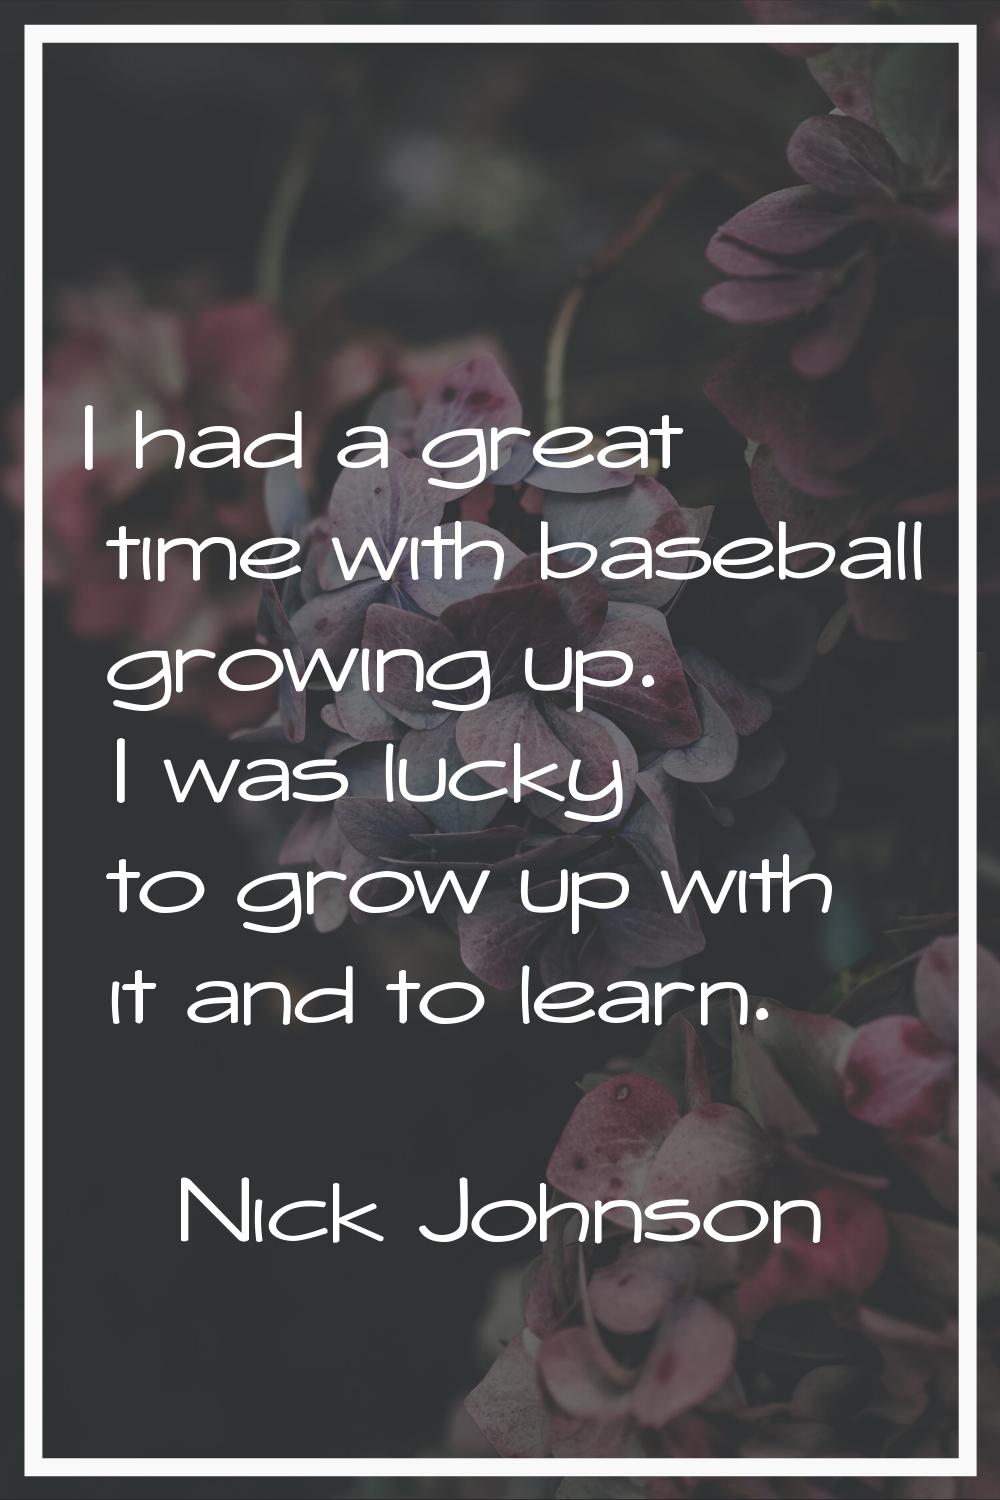 I had a great time with baseball growing up. I was lucky to grow up with it and to learn.